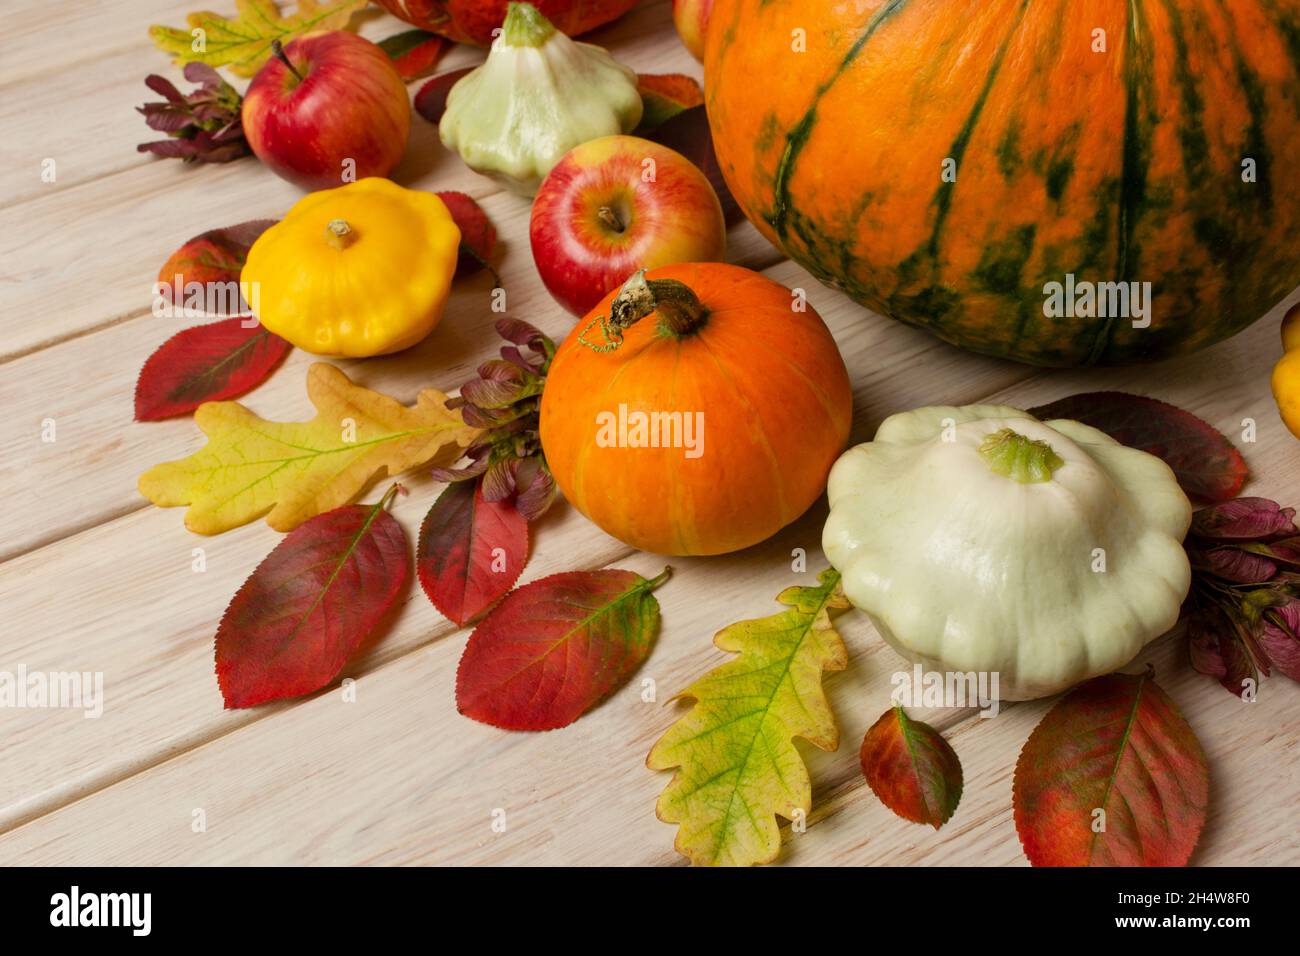 Thanksgiving centerpiece with small pumpkin, oak leaves, yellow and white squash and on the white wooden table Stock Photo